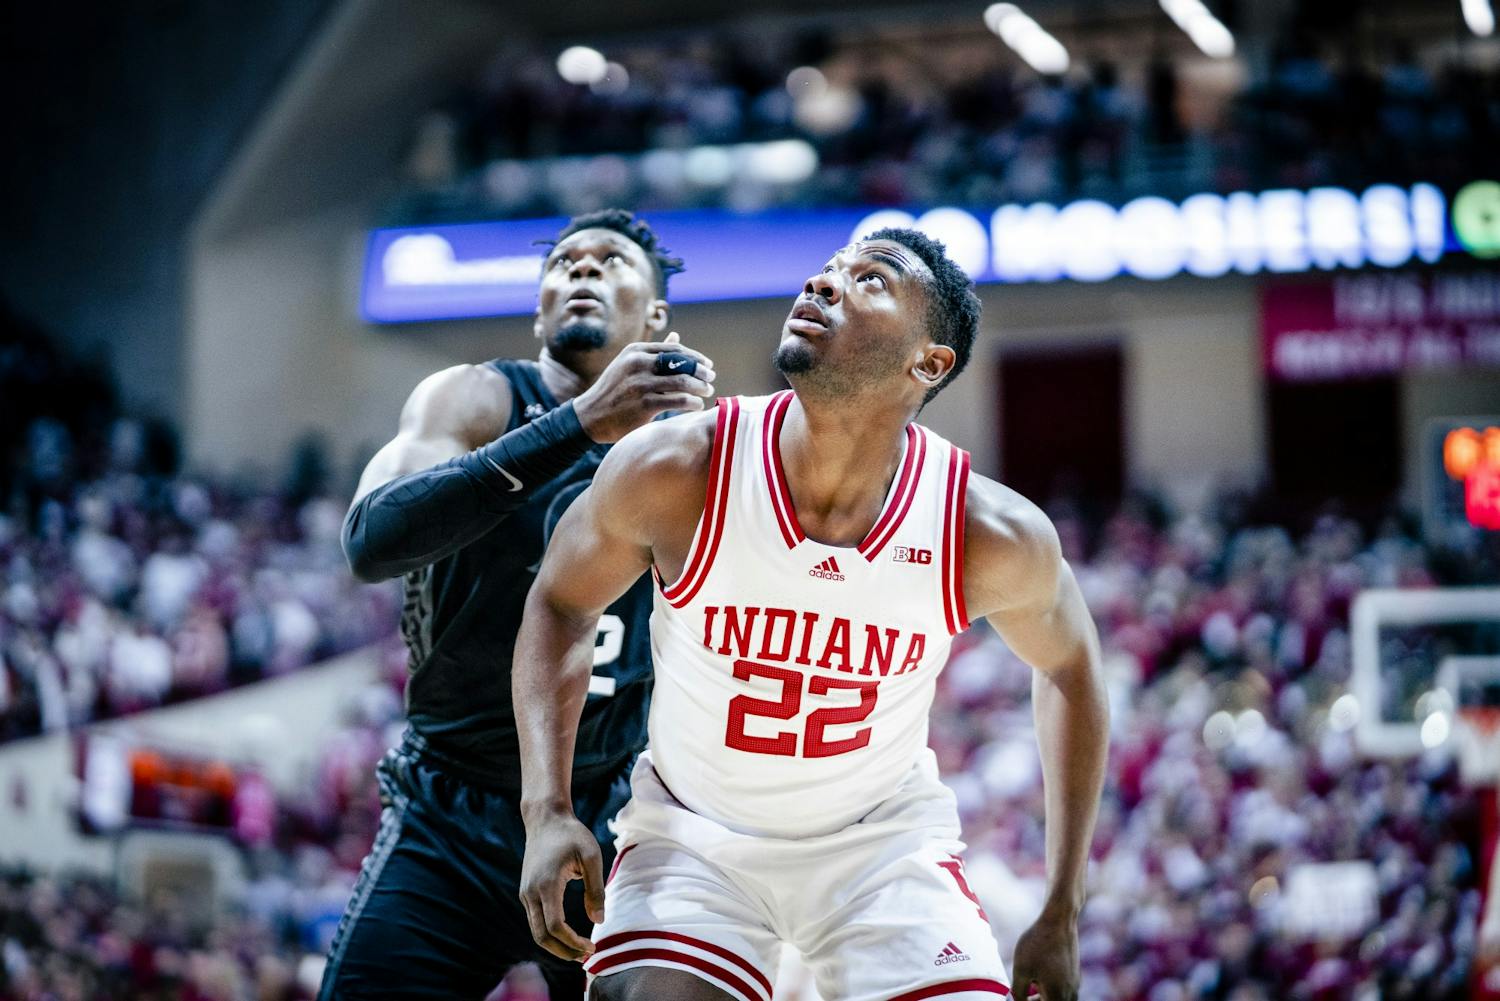 GALLERY: Indiana men's basketball returns home with a win against Michigan State